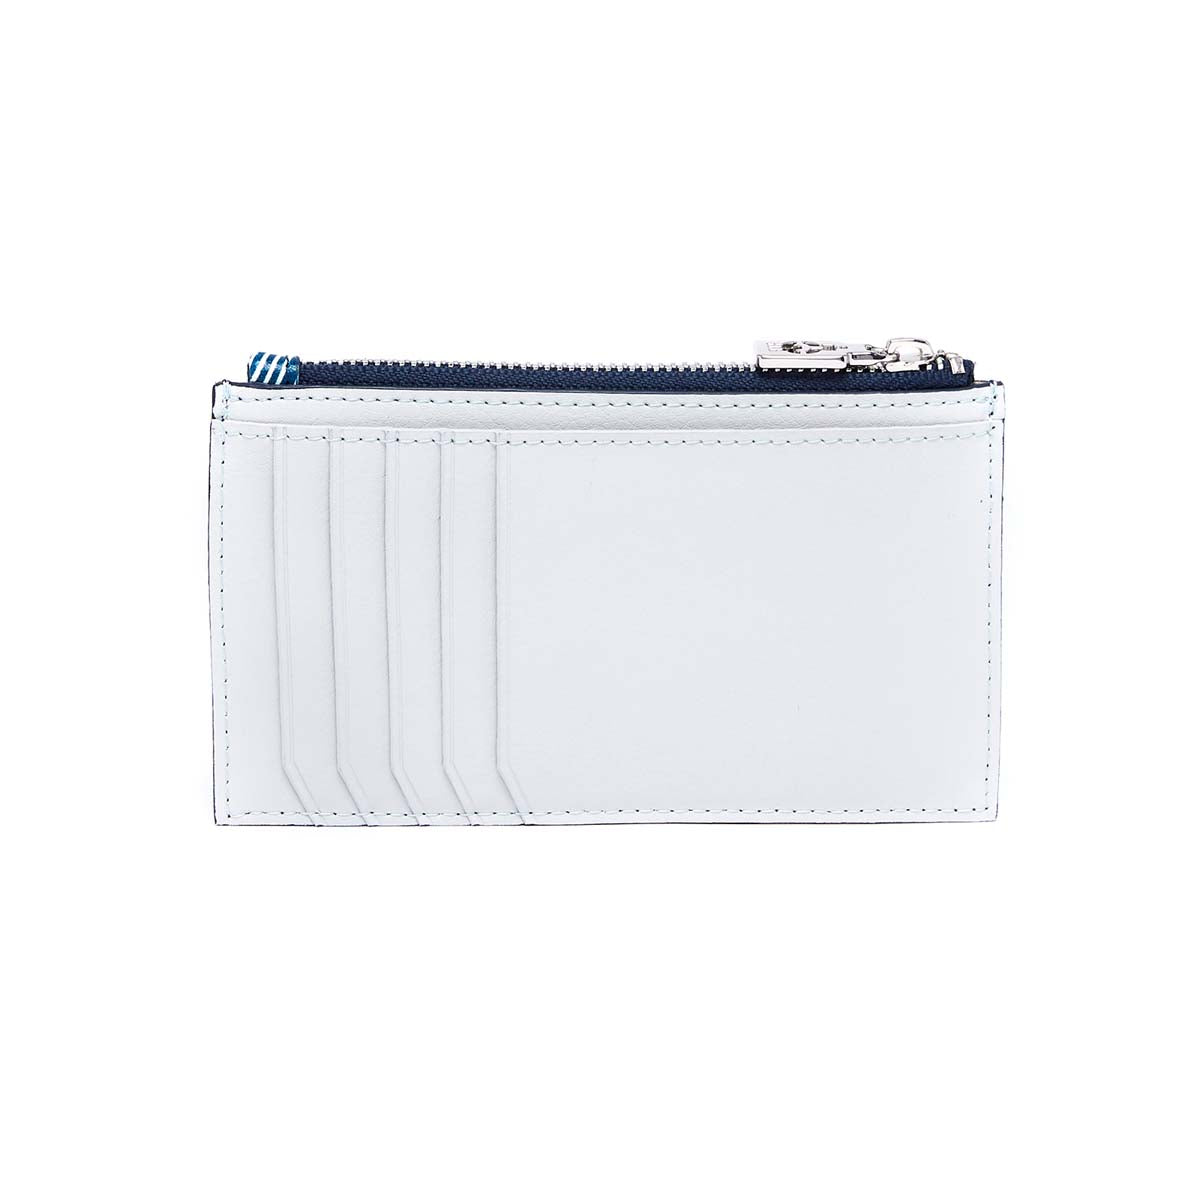 Women's zipped card holder - 100% leather - 5 compartments